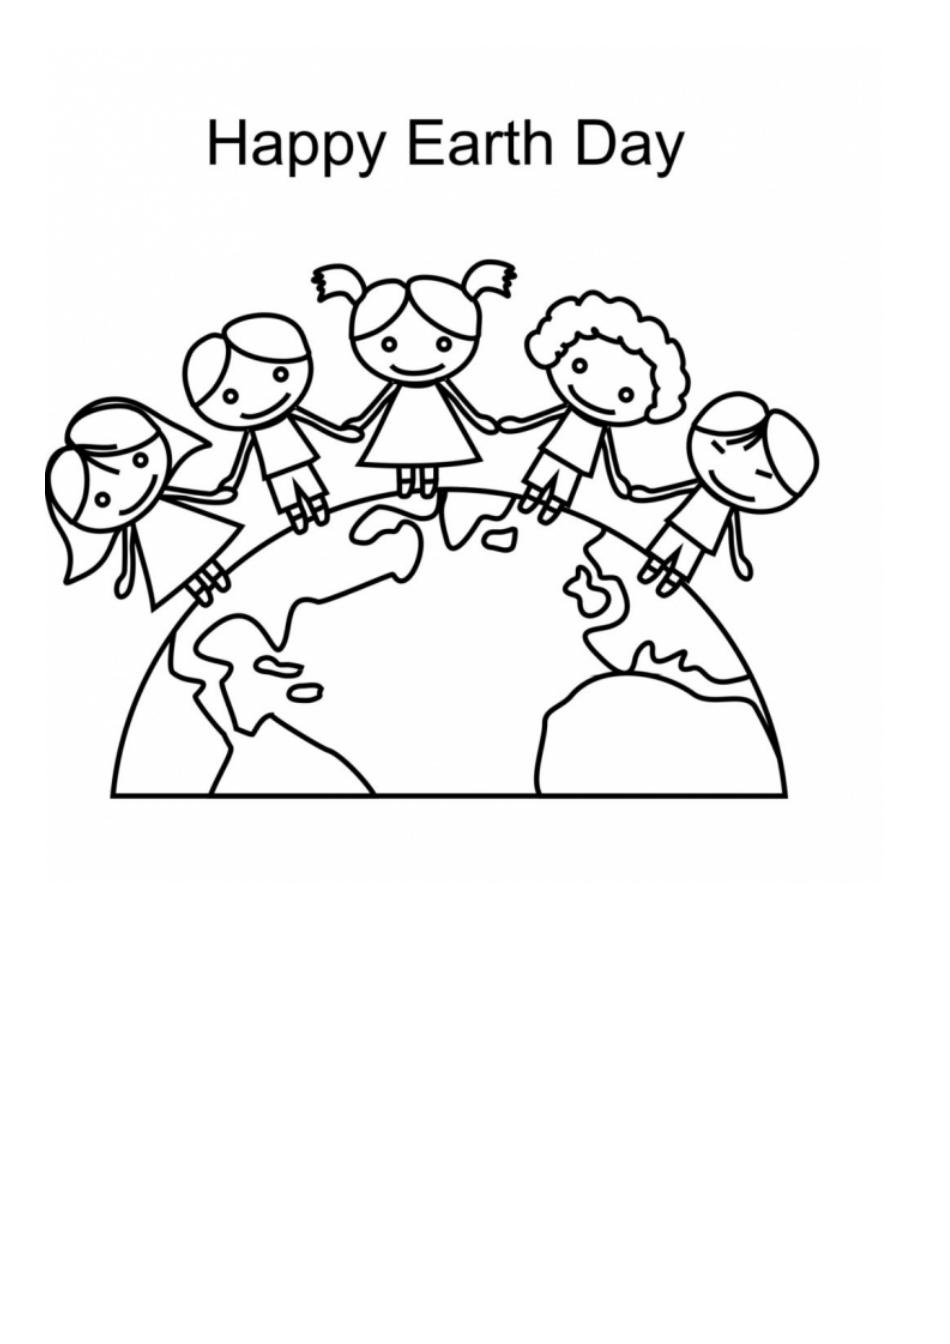 Happy Earth Day Coloring Page image preview